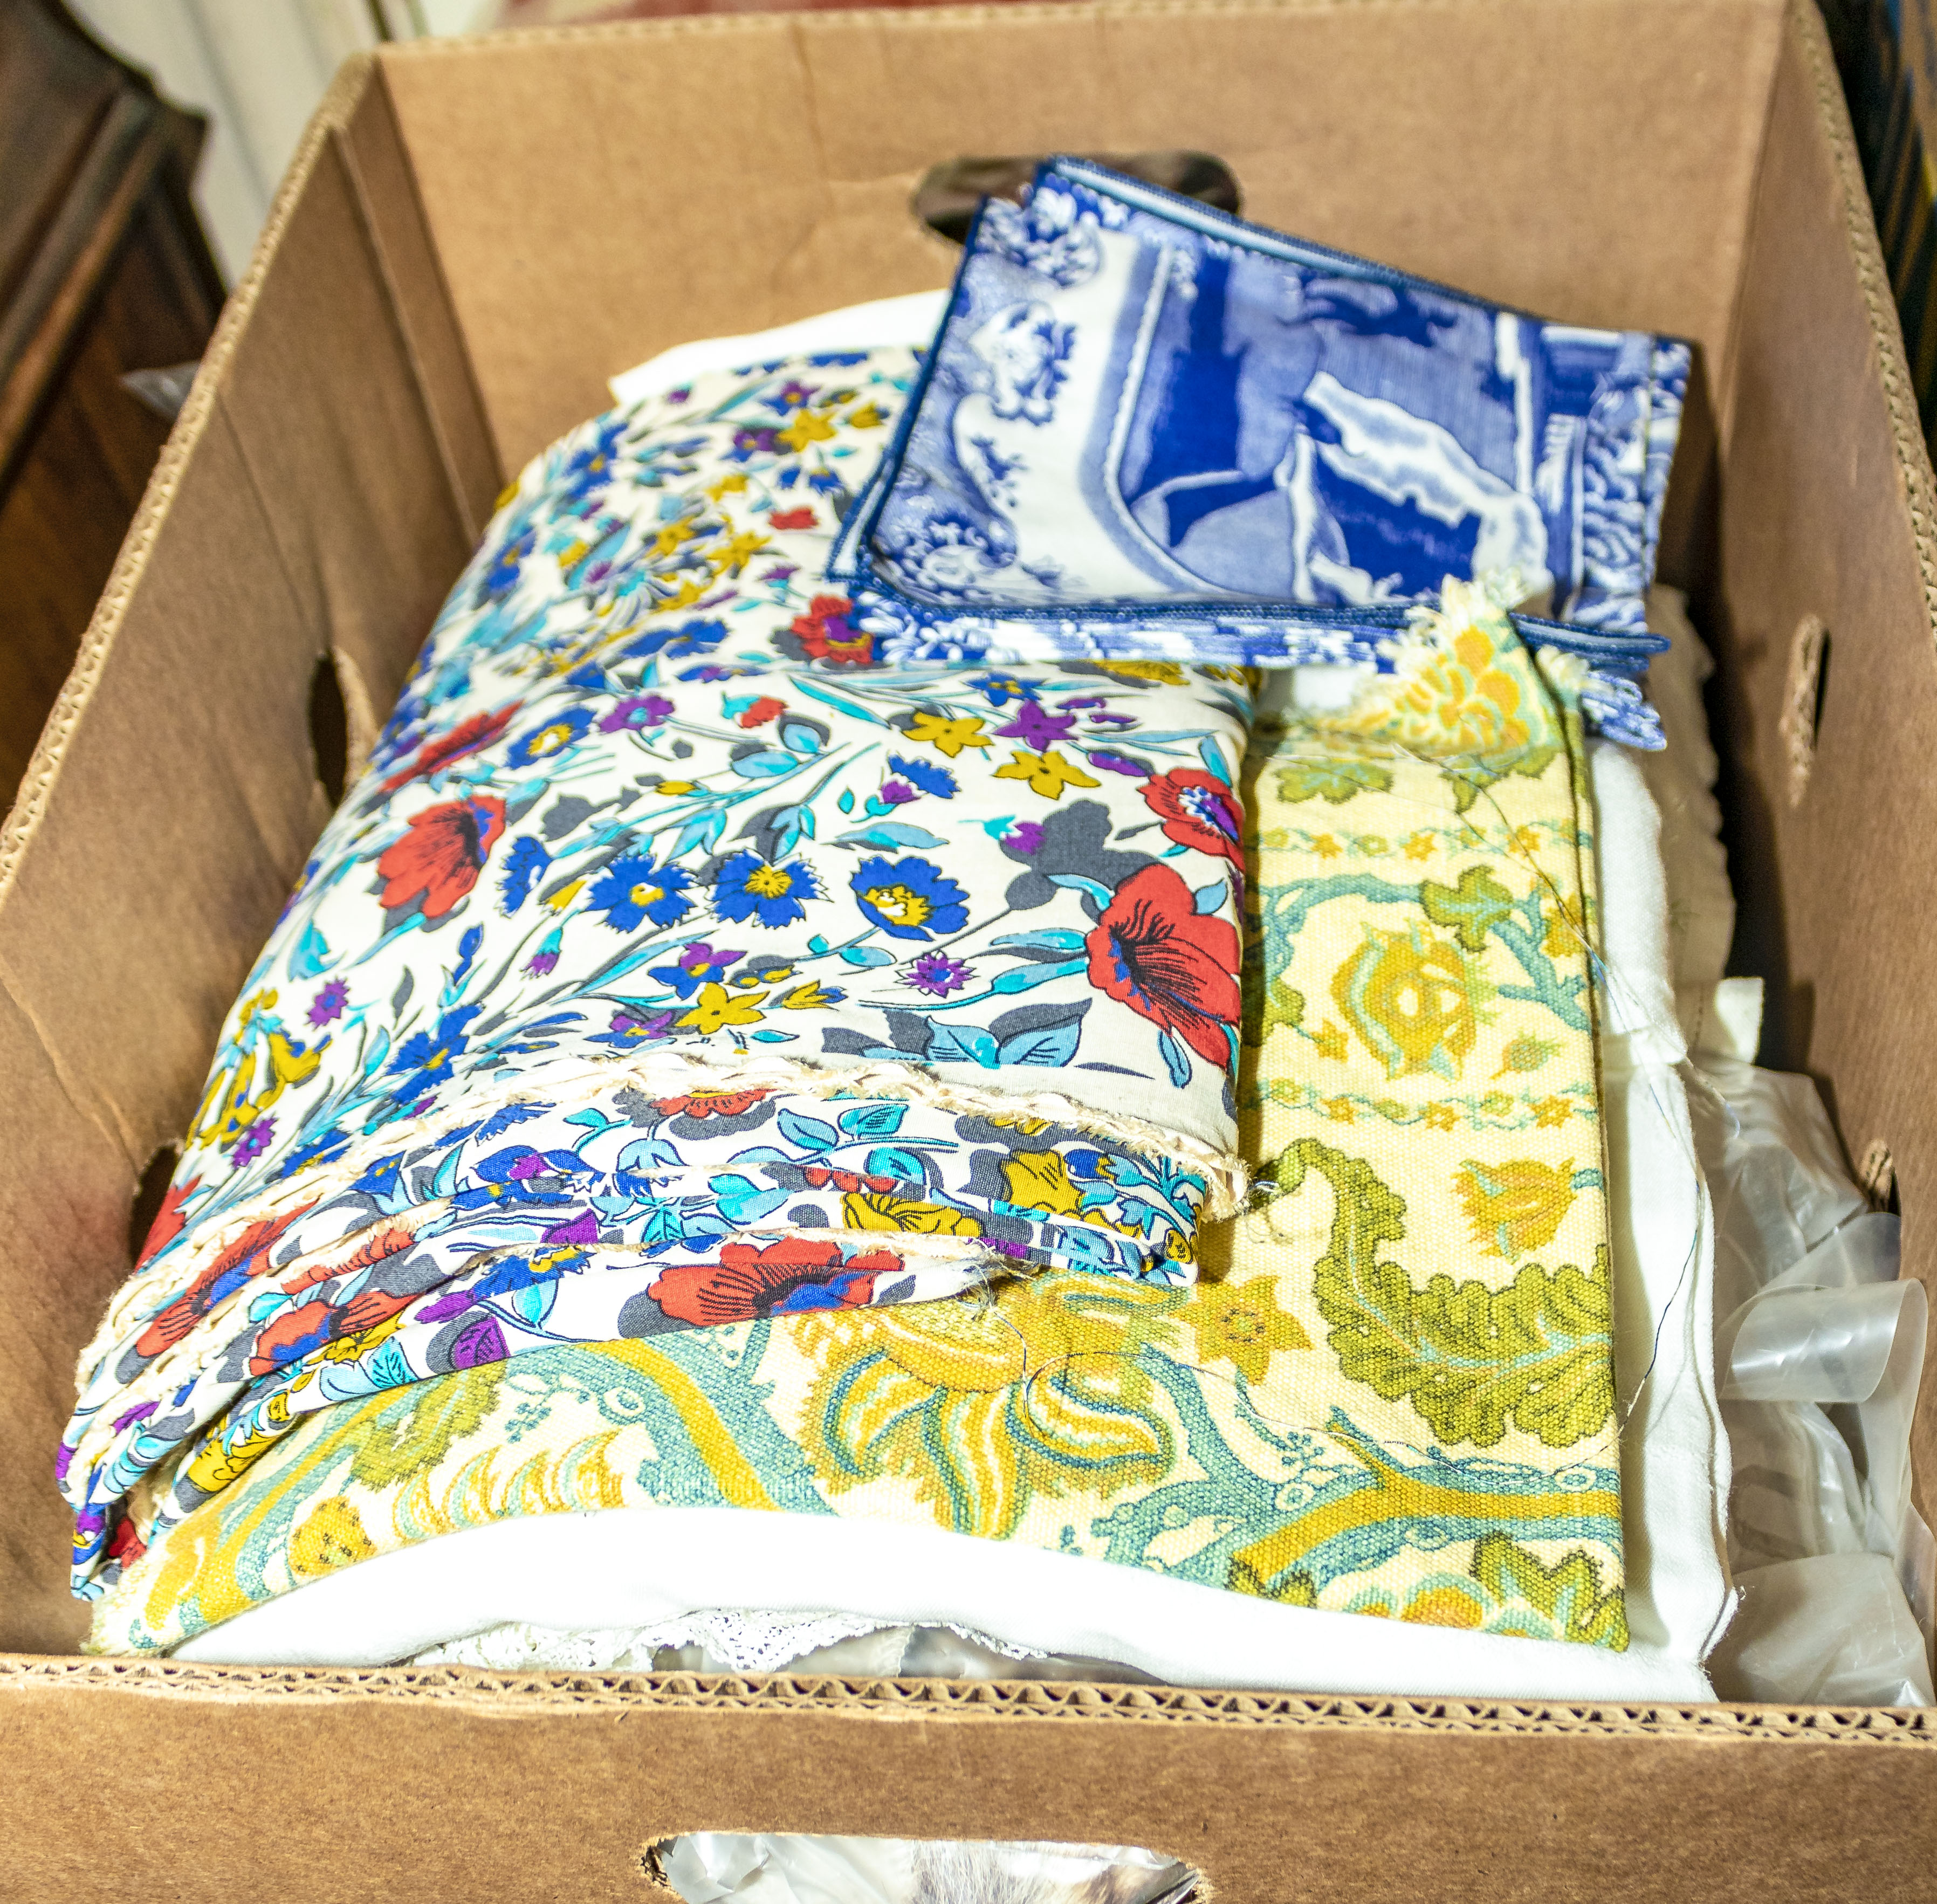 A box containing vintage linen and fabric